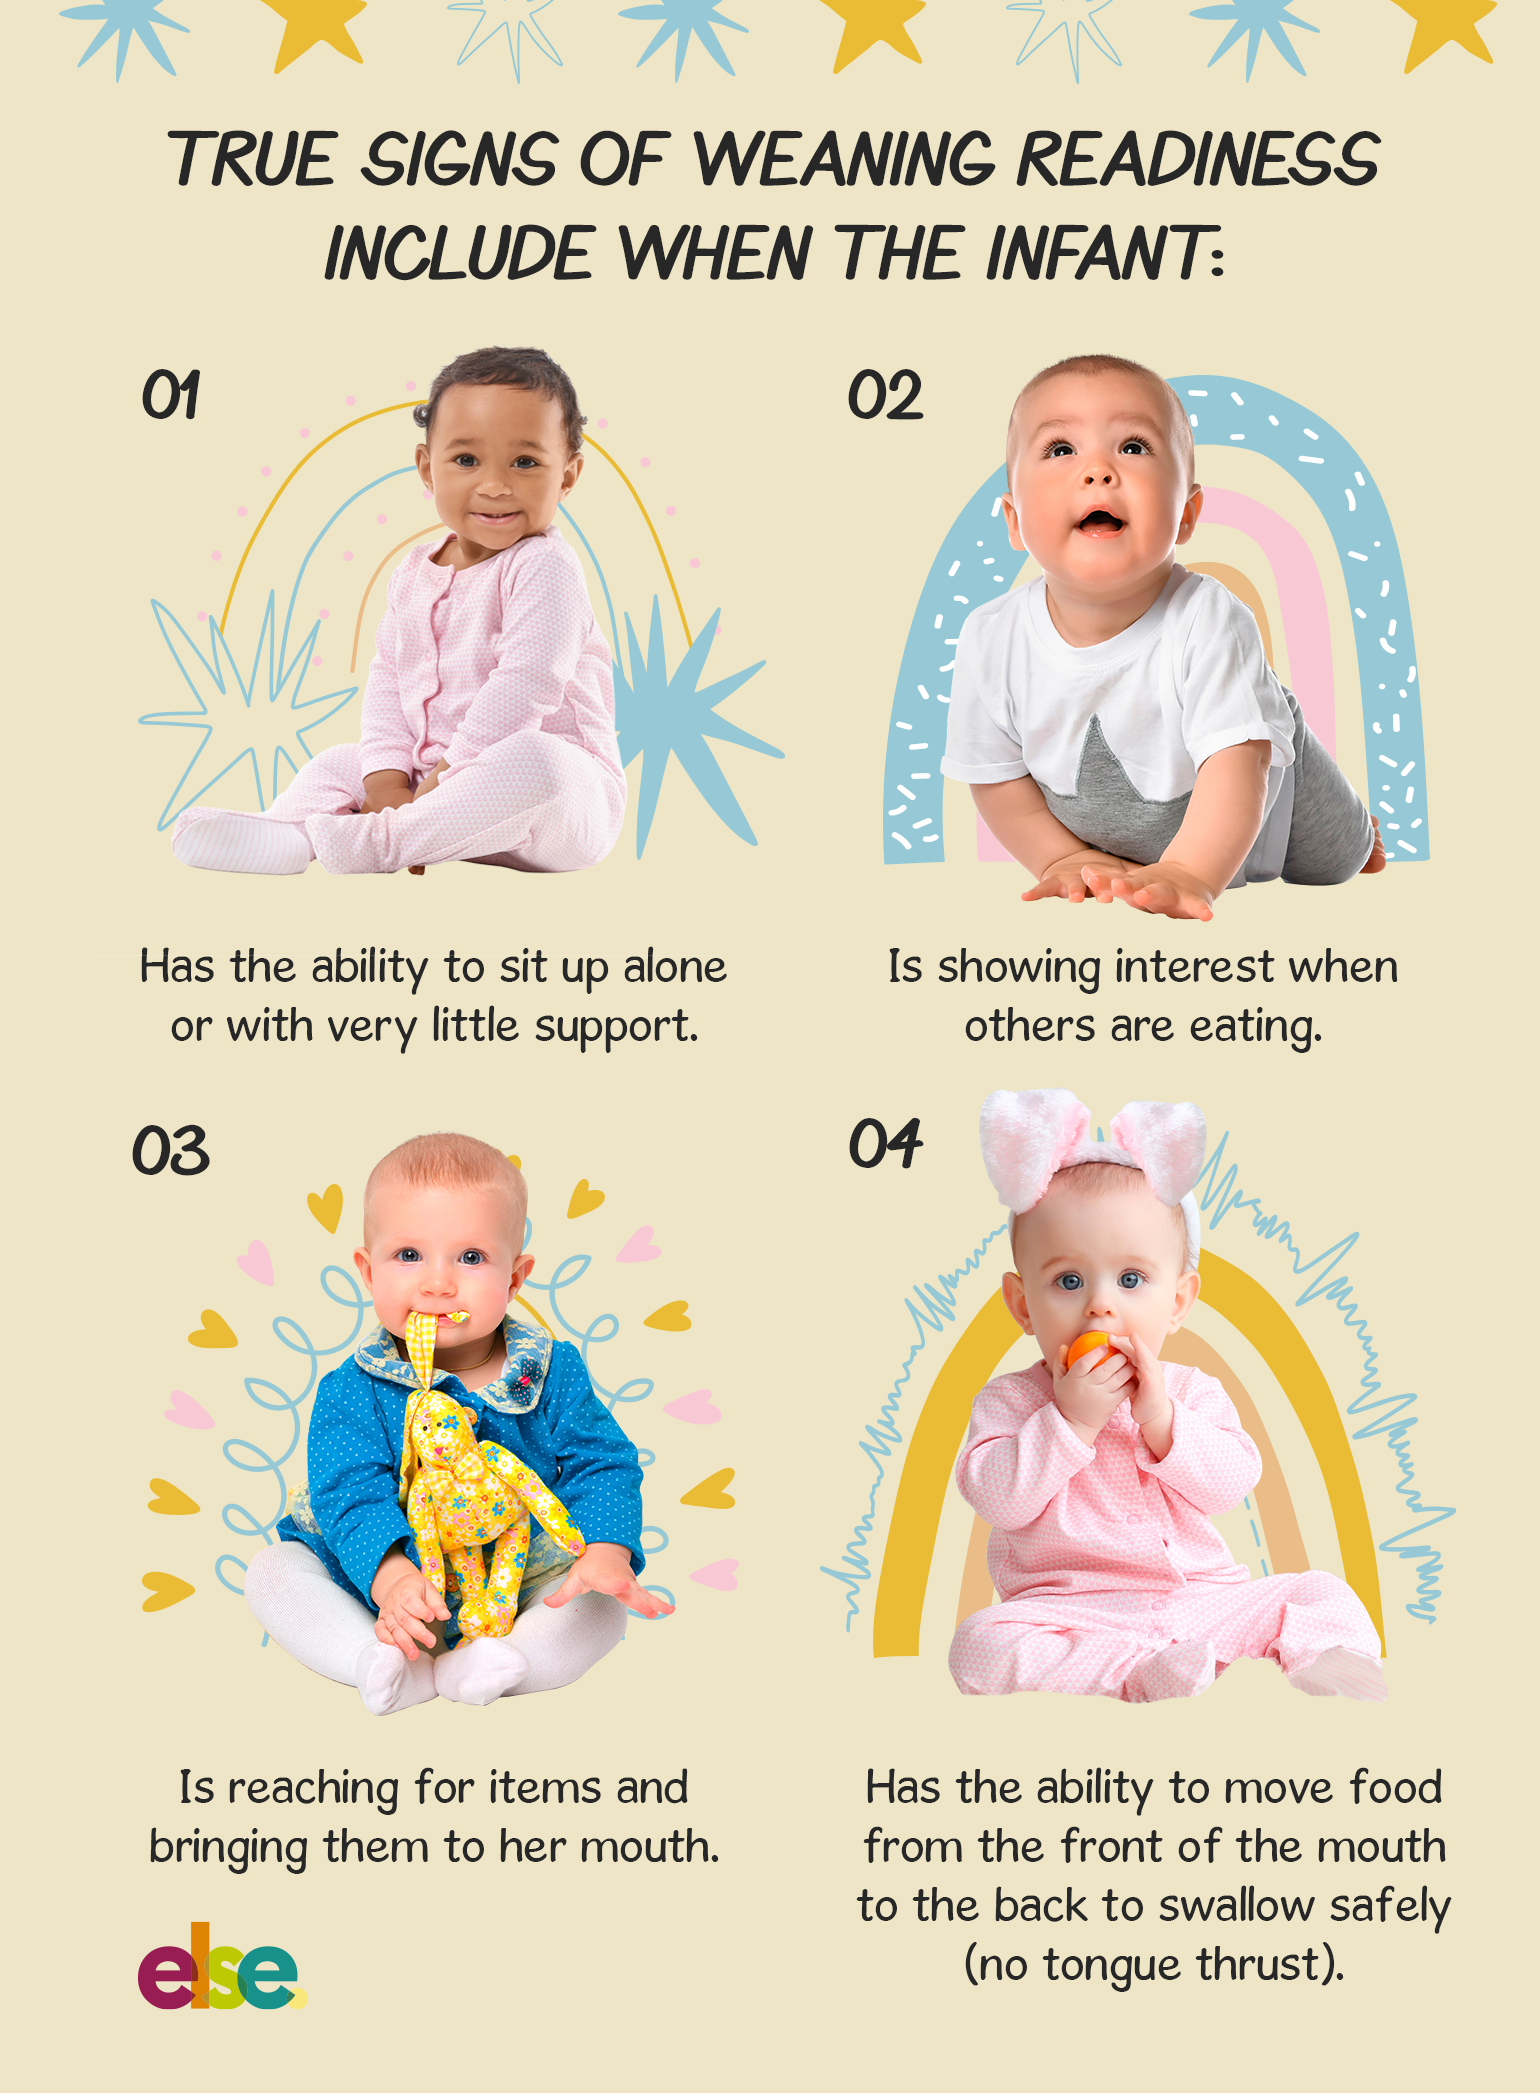 https://cdn.shopify.com/s/files/1/0292/6385/5675/files/True_signs_of_readiness_include_when_the_infant.png?v=1614881717